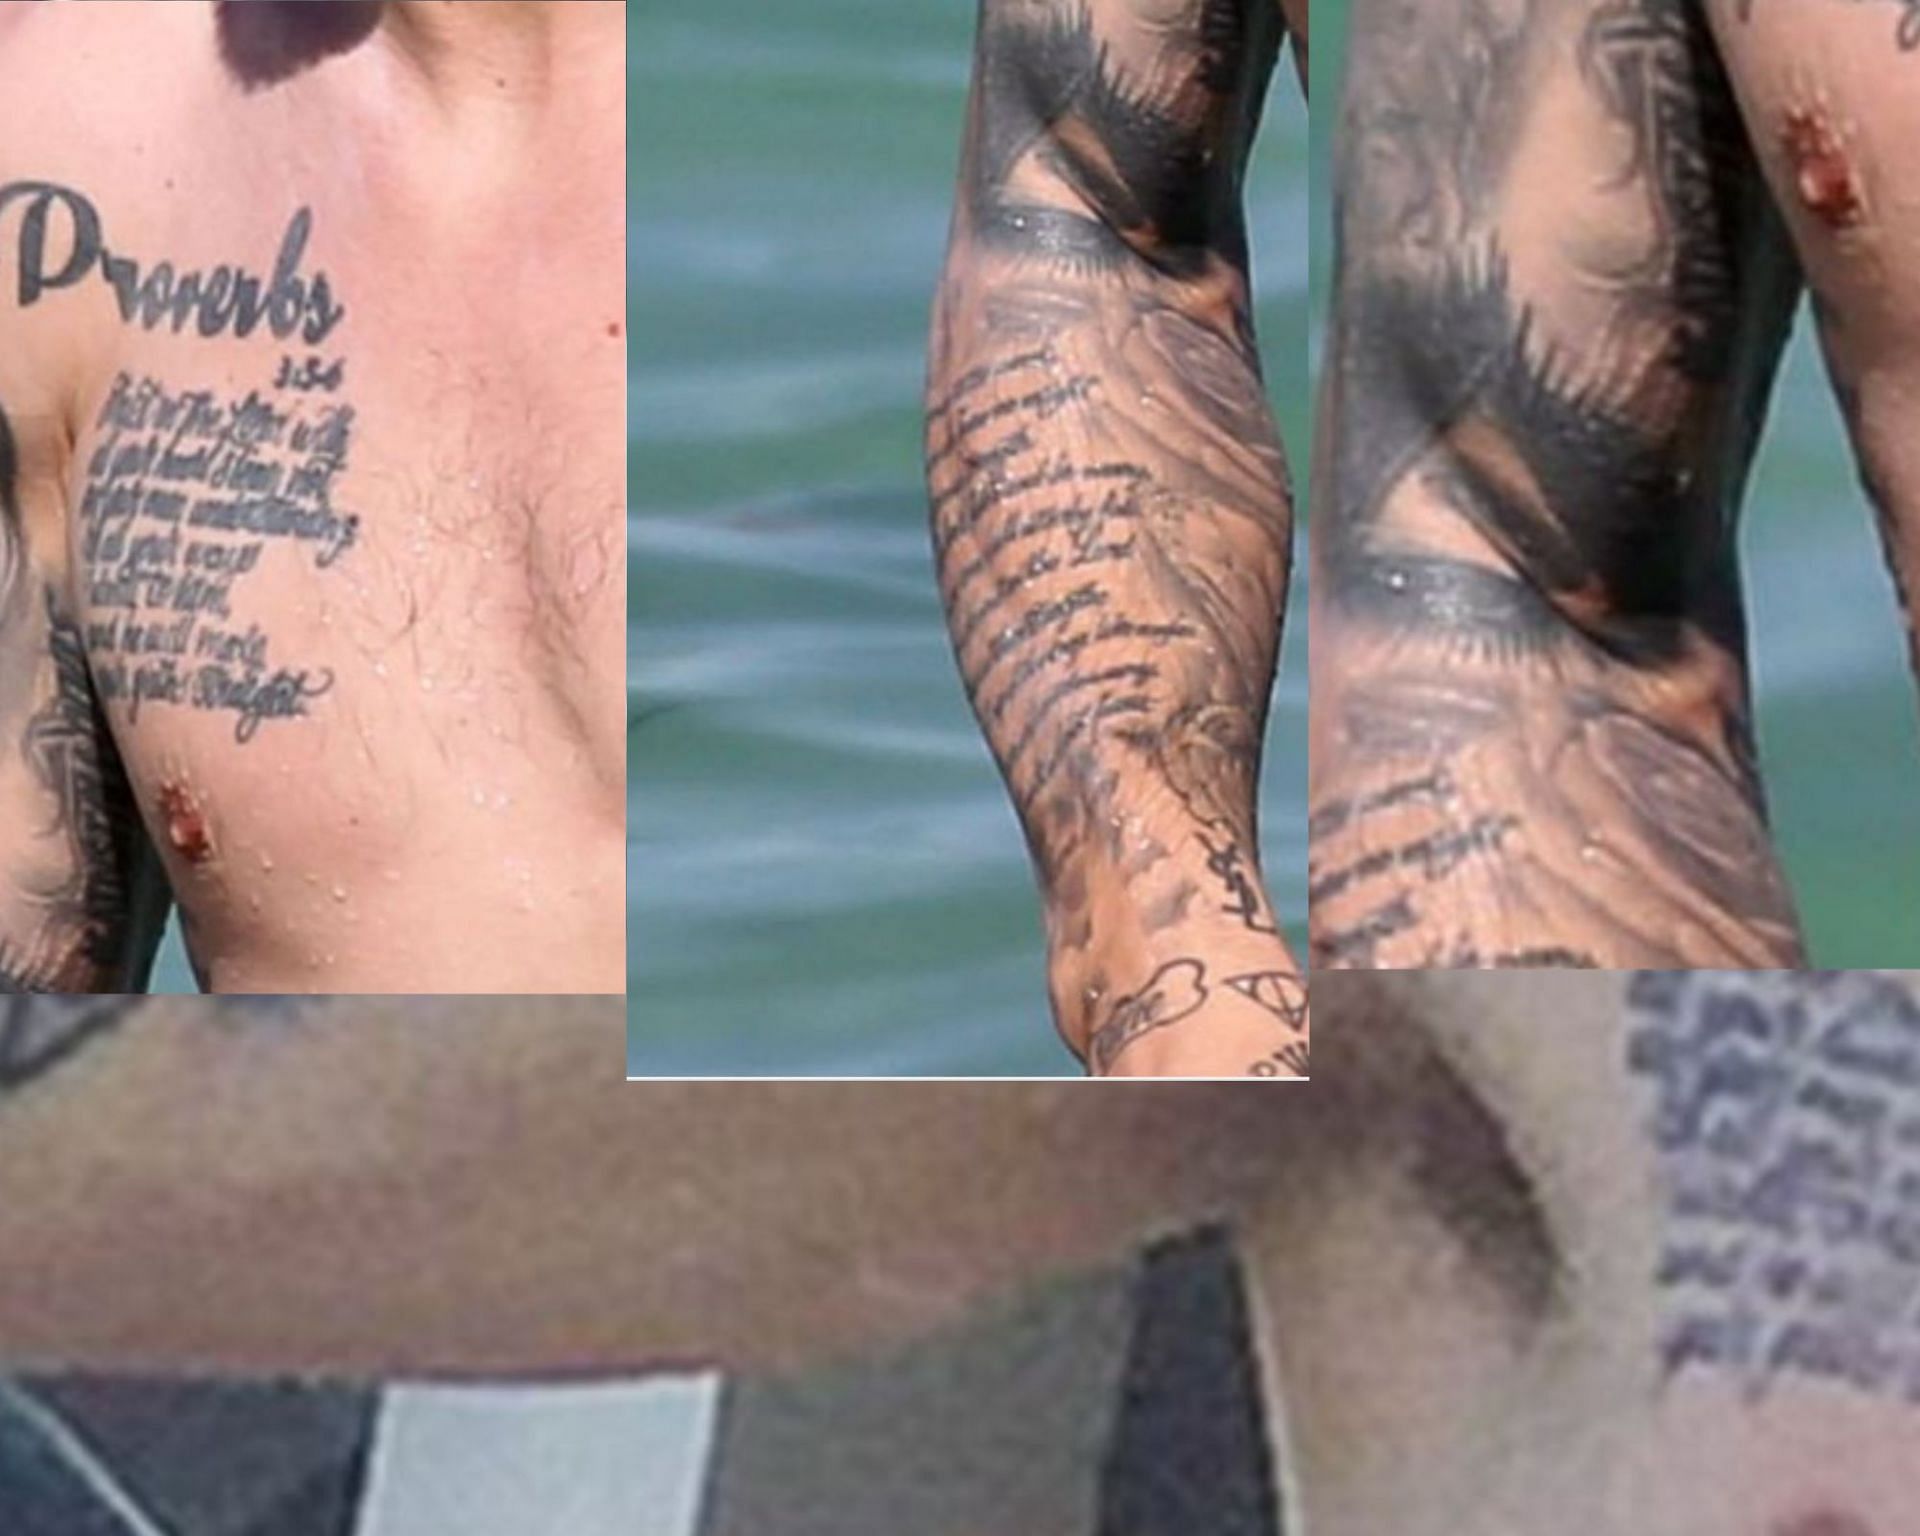 Manziel&#039;s tattoos depict deep spiritual and personal meanings